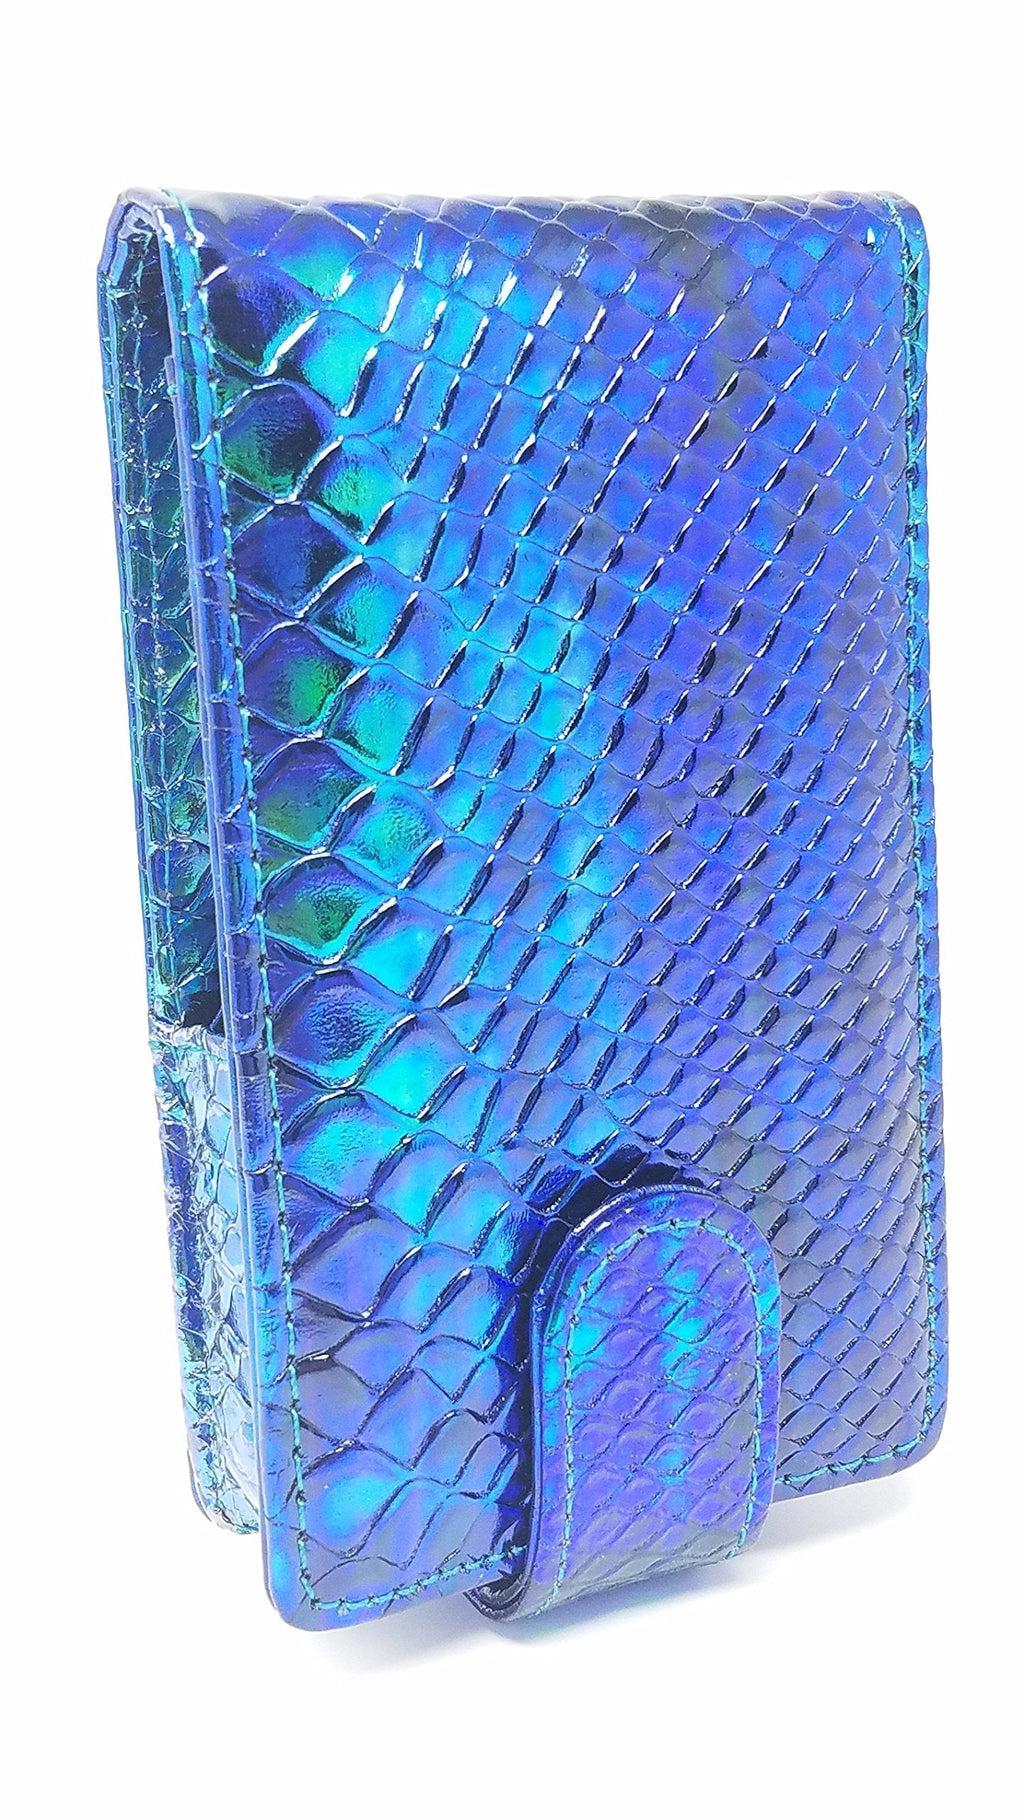 LipSense Makeup Lipstick Mermaid Case with Mirror for Purse by CariWare | Cosmetic Pouch with Mirror & Card Slot - Fits Lip Sense Gloss Glossy and Most Popular Brands of Liquid Long Lipstick - LeoForward Australia